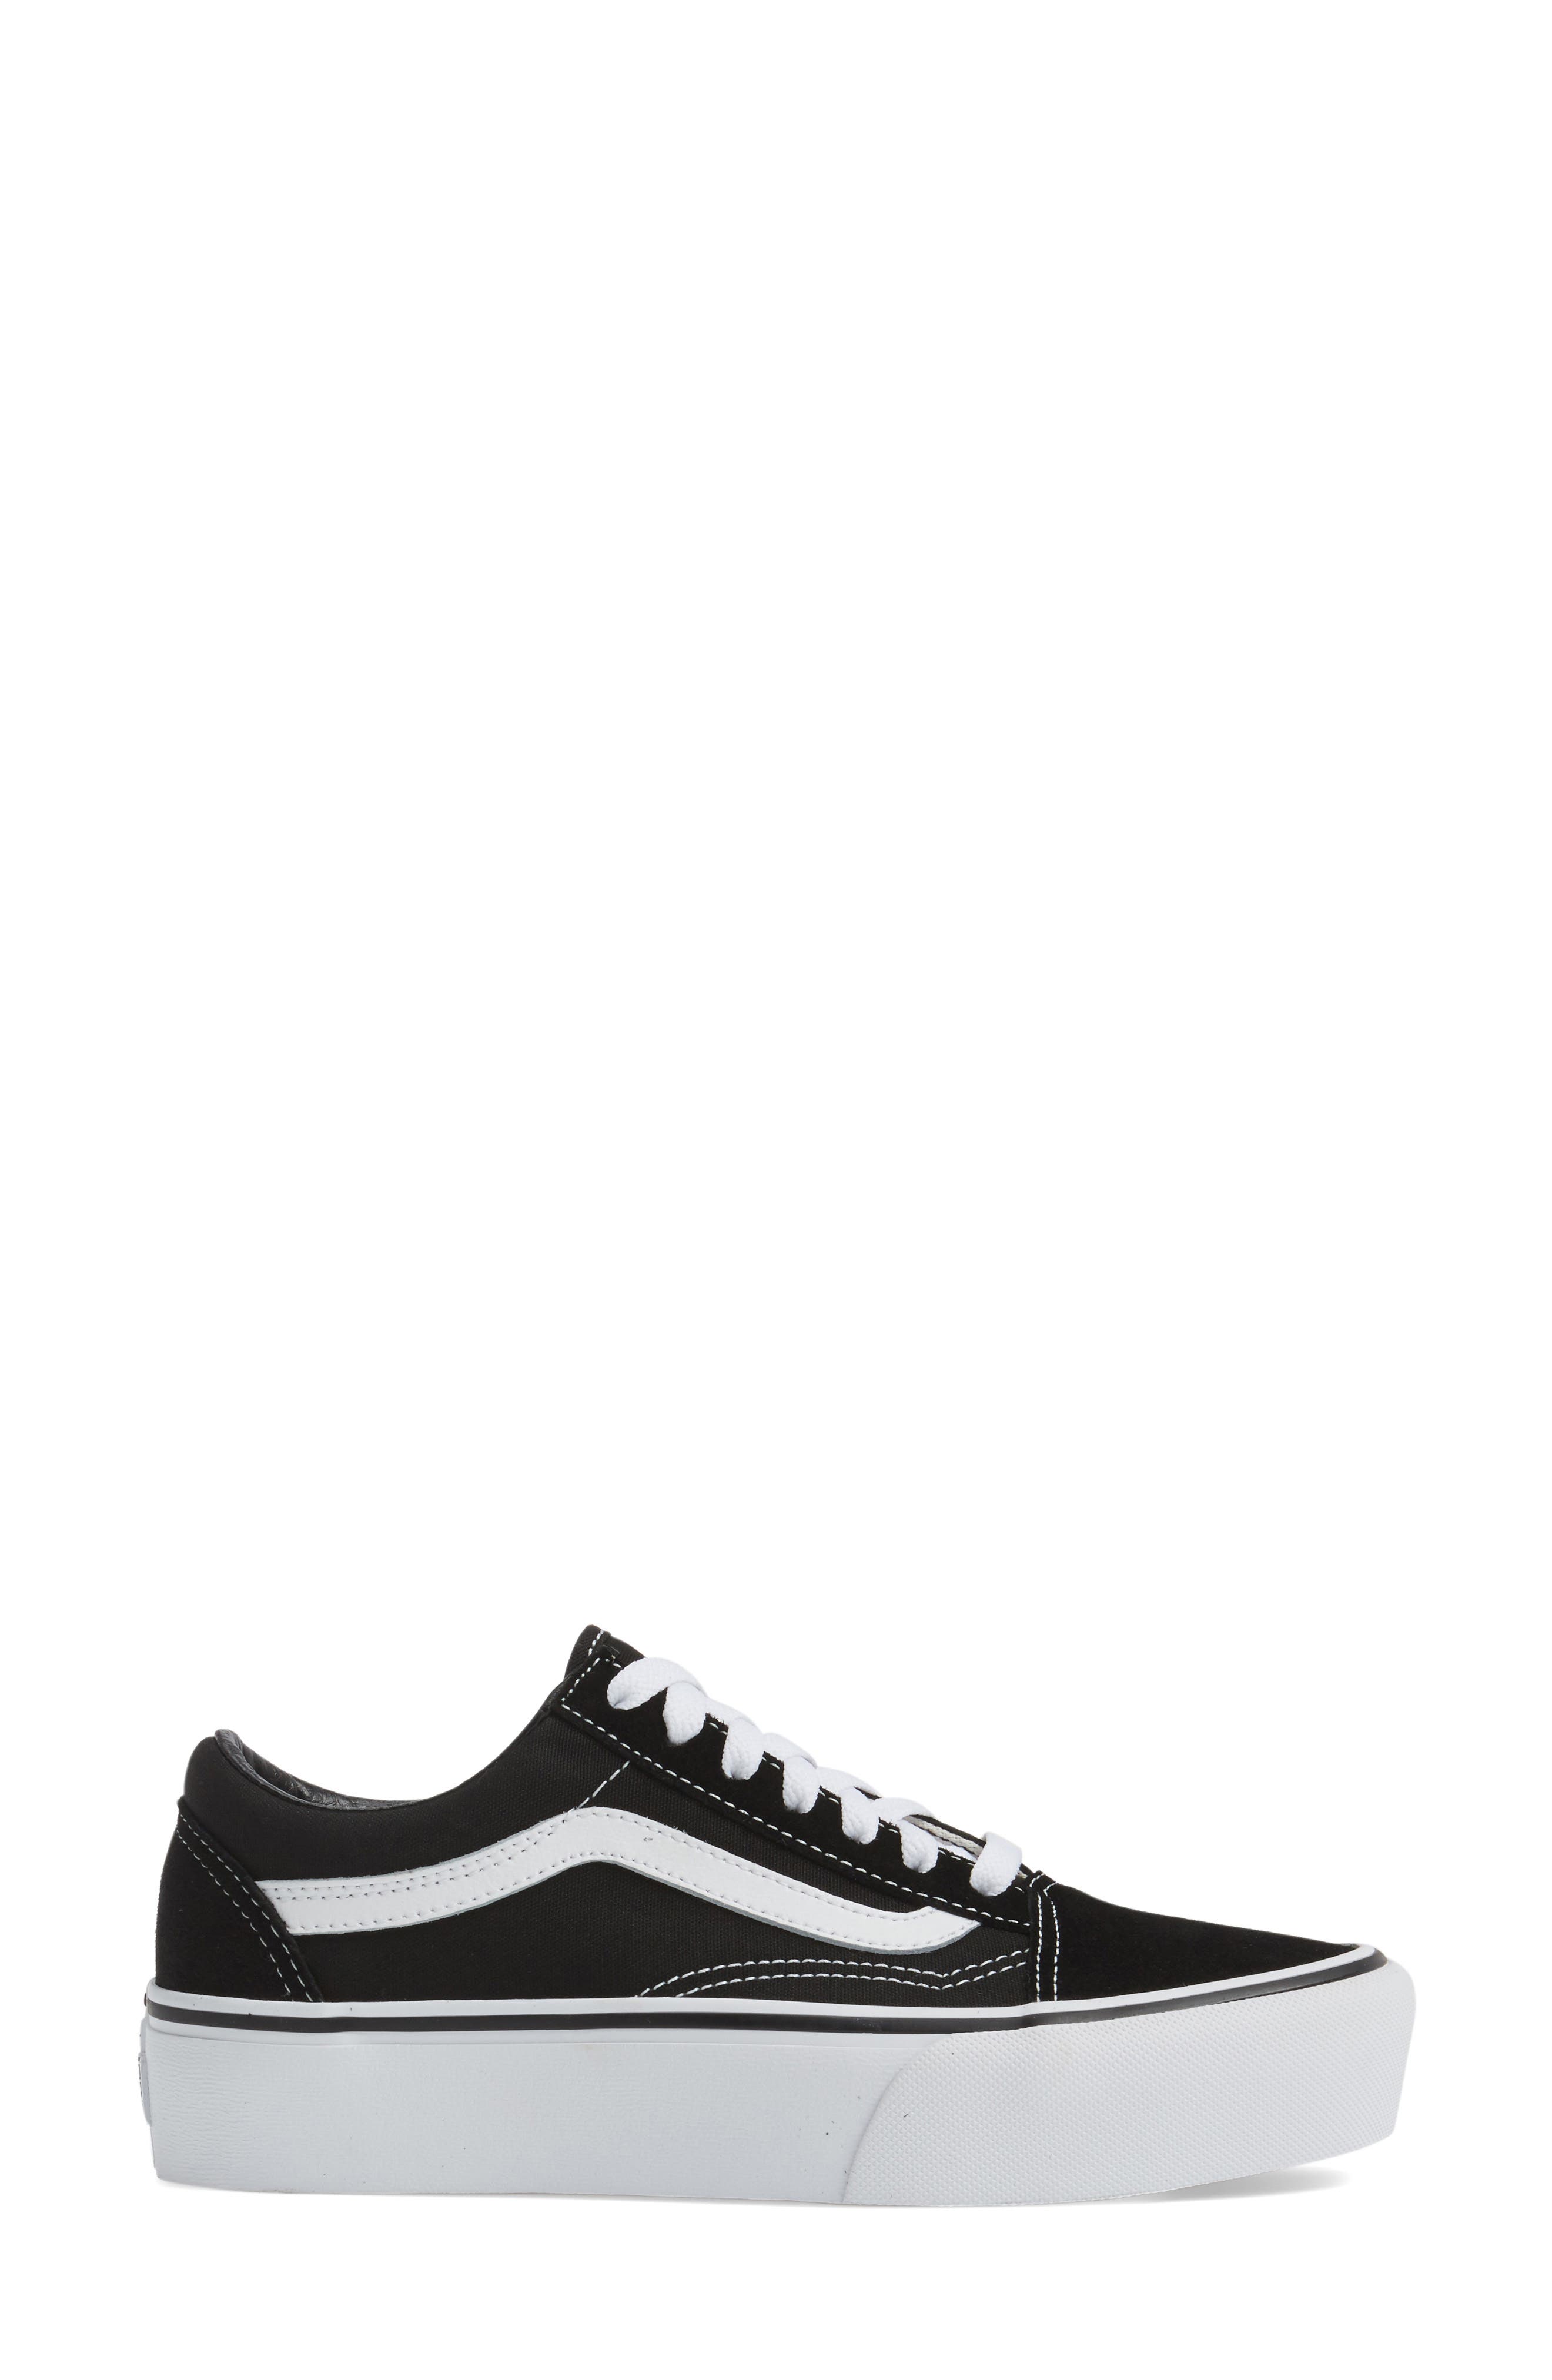 where to buy vans chef shoes